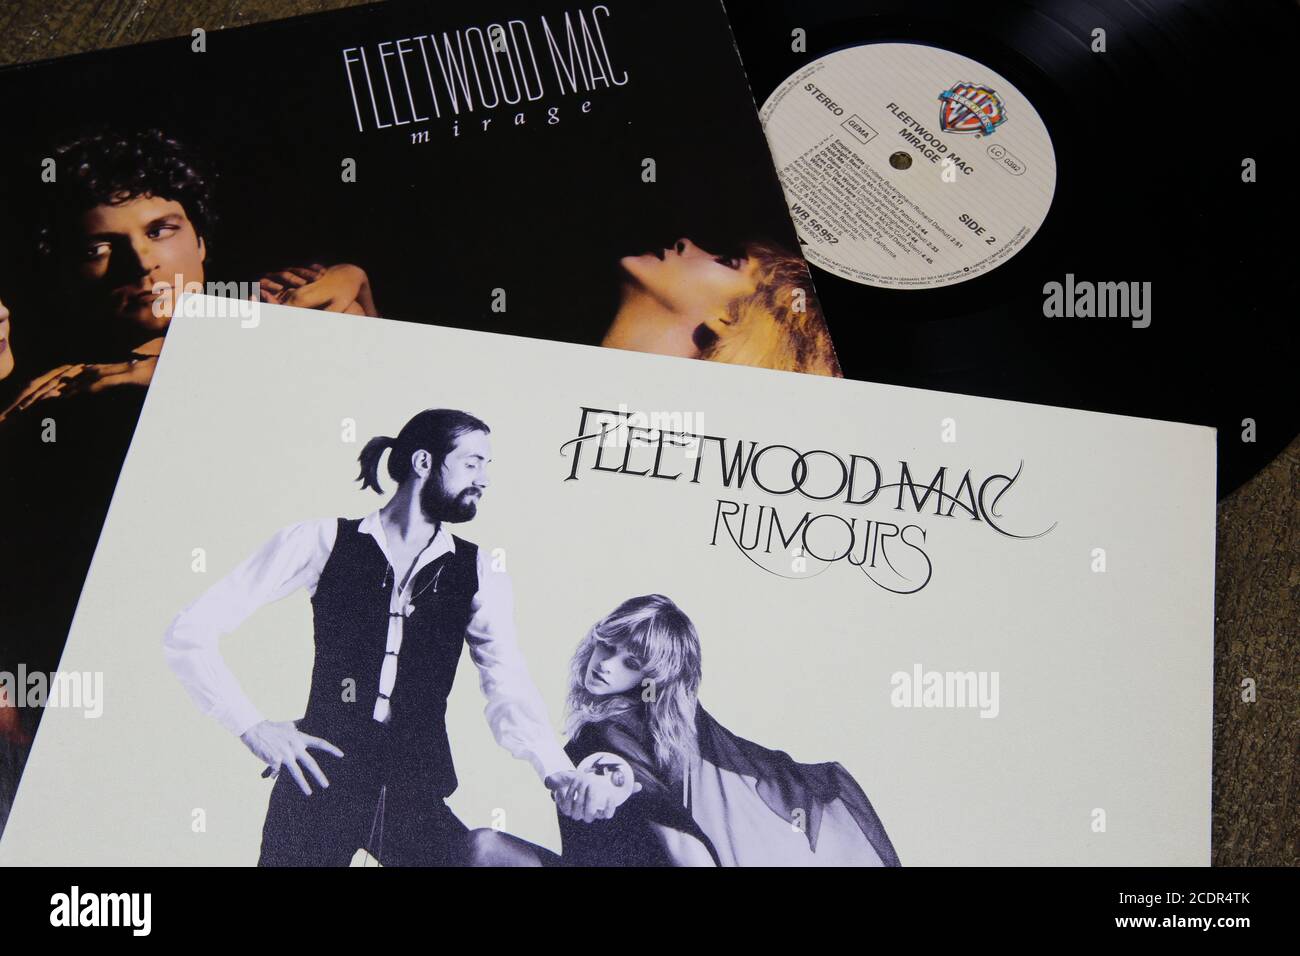 Viersen, Germany - July 9. 2020: Closeup of Fleetwood Mac band vinyl record cover collection Stock Photo